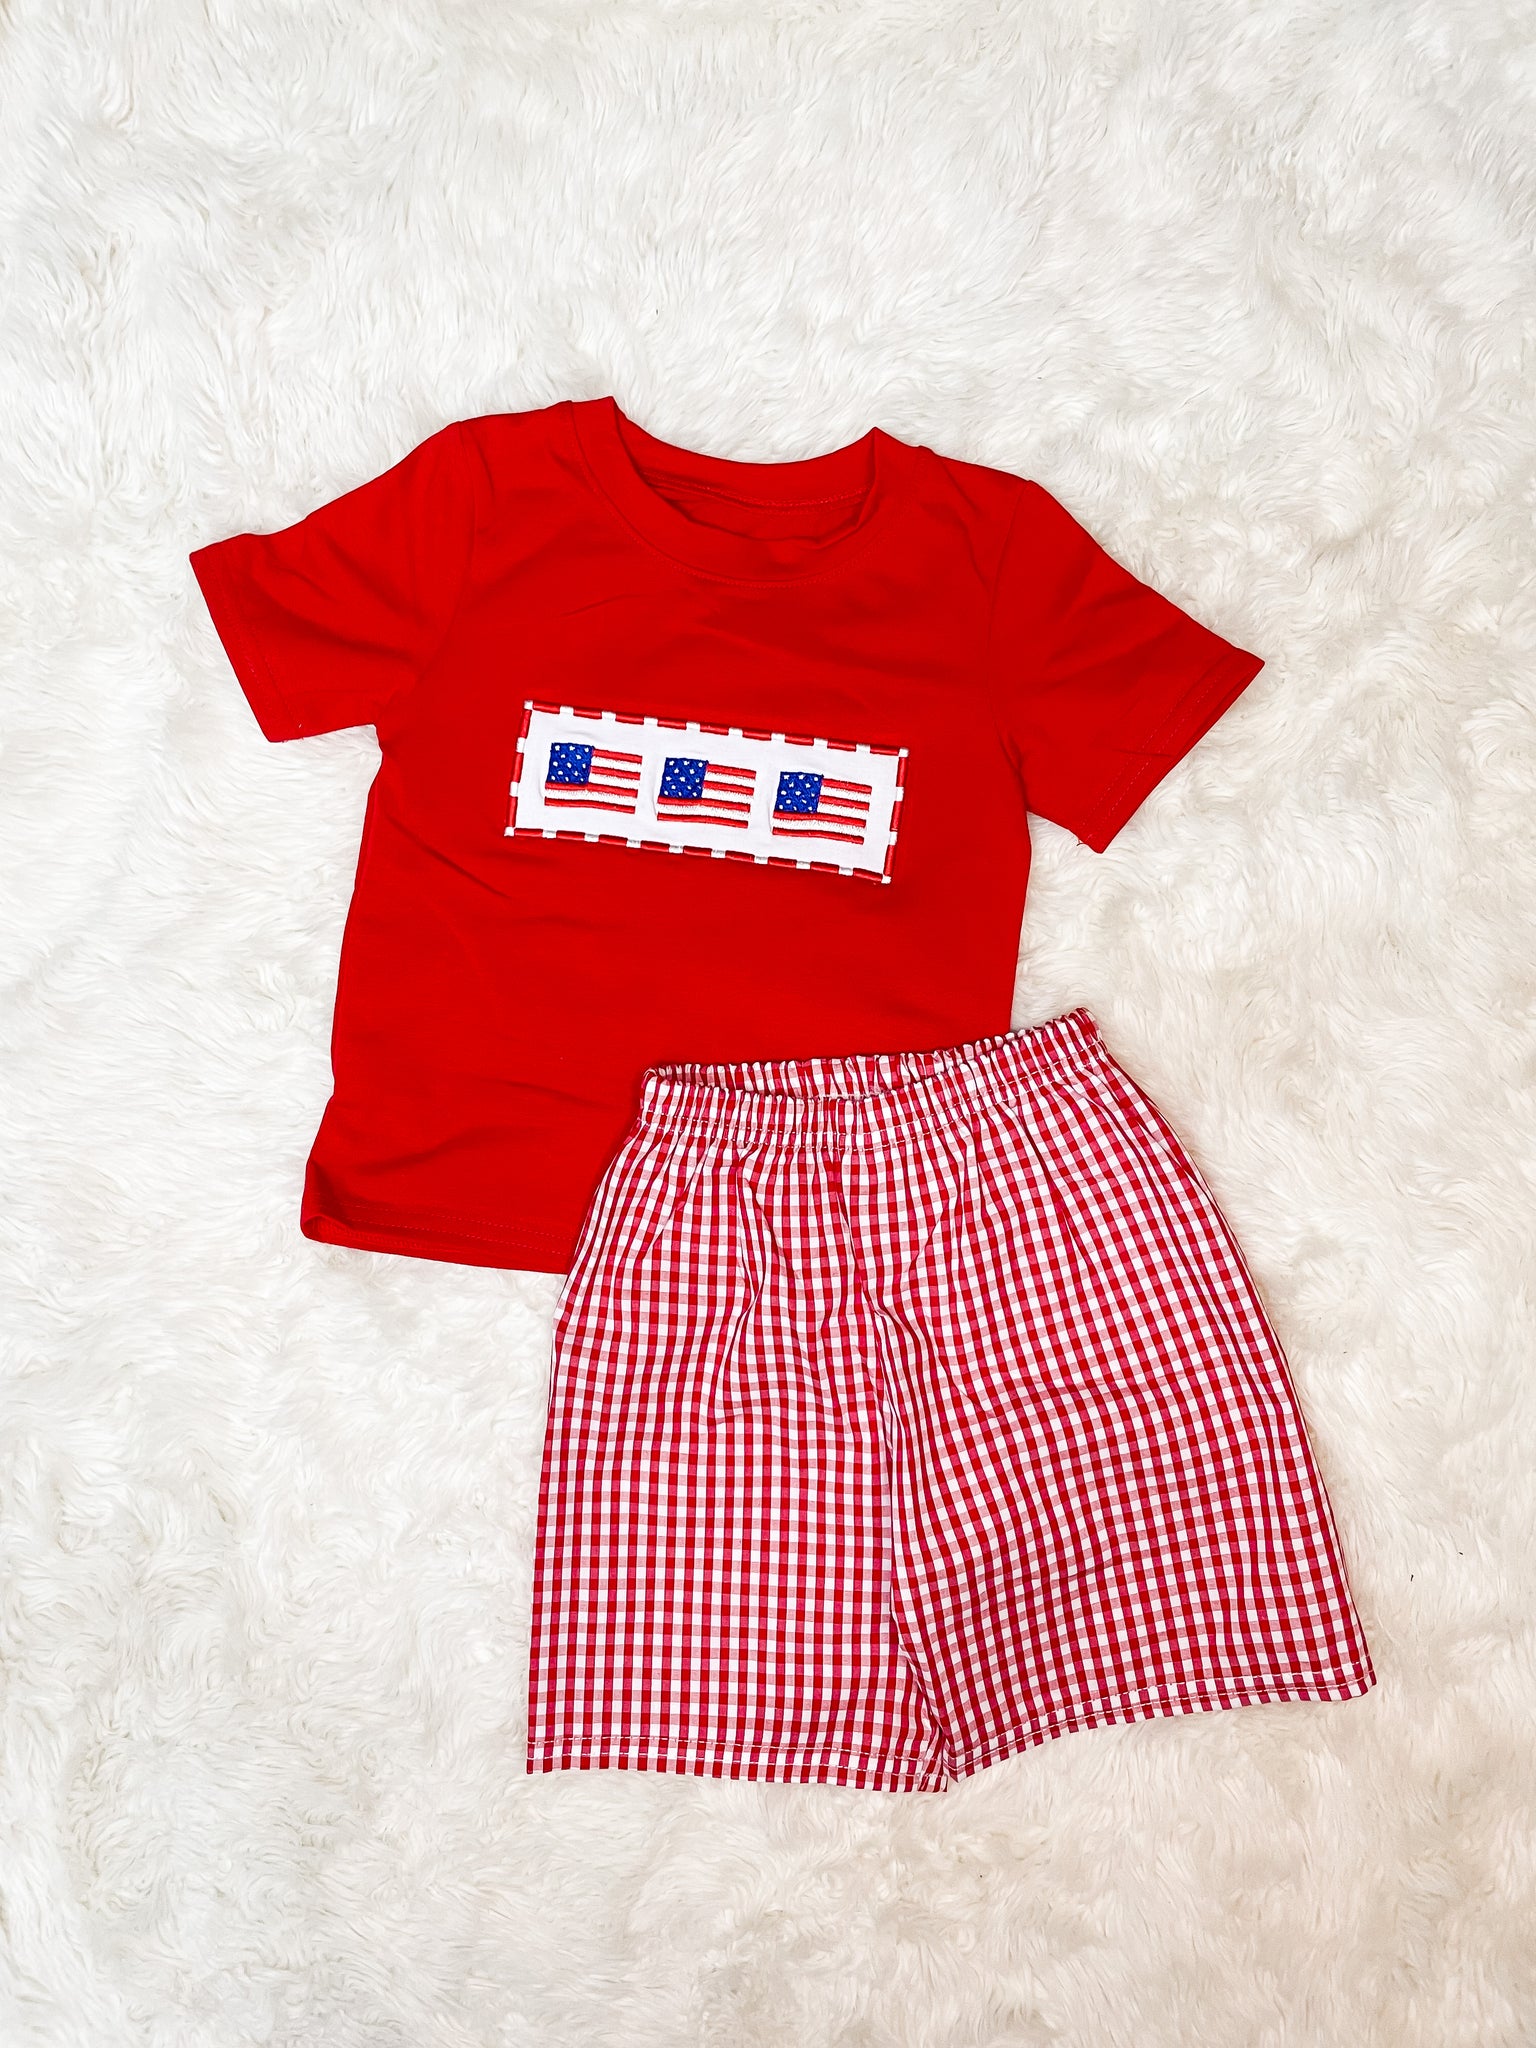 Boys Red Gingham American Flag Embroidery Short Set